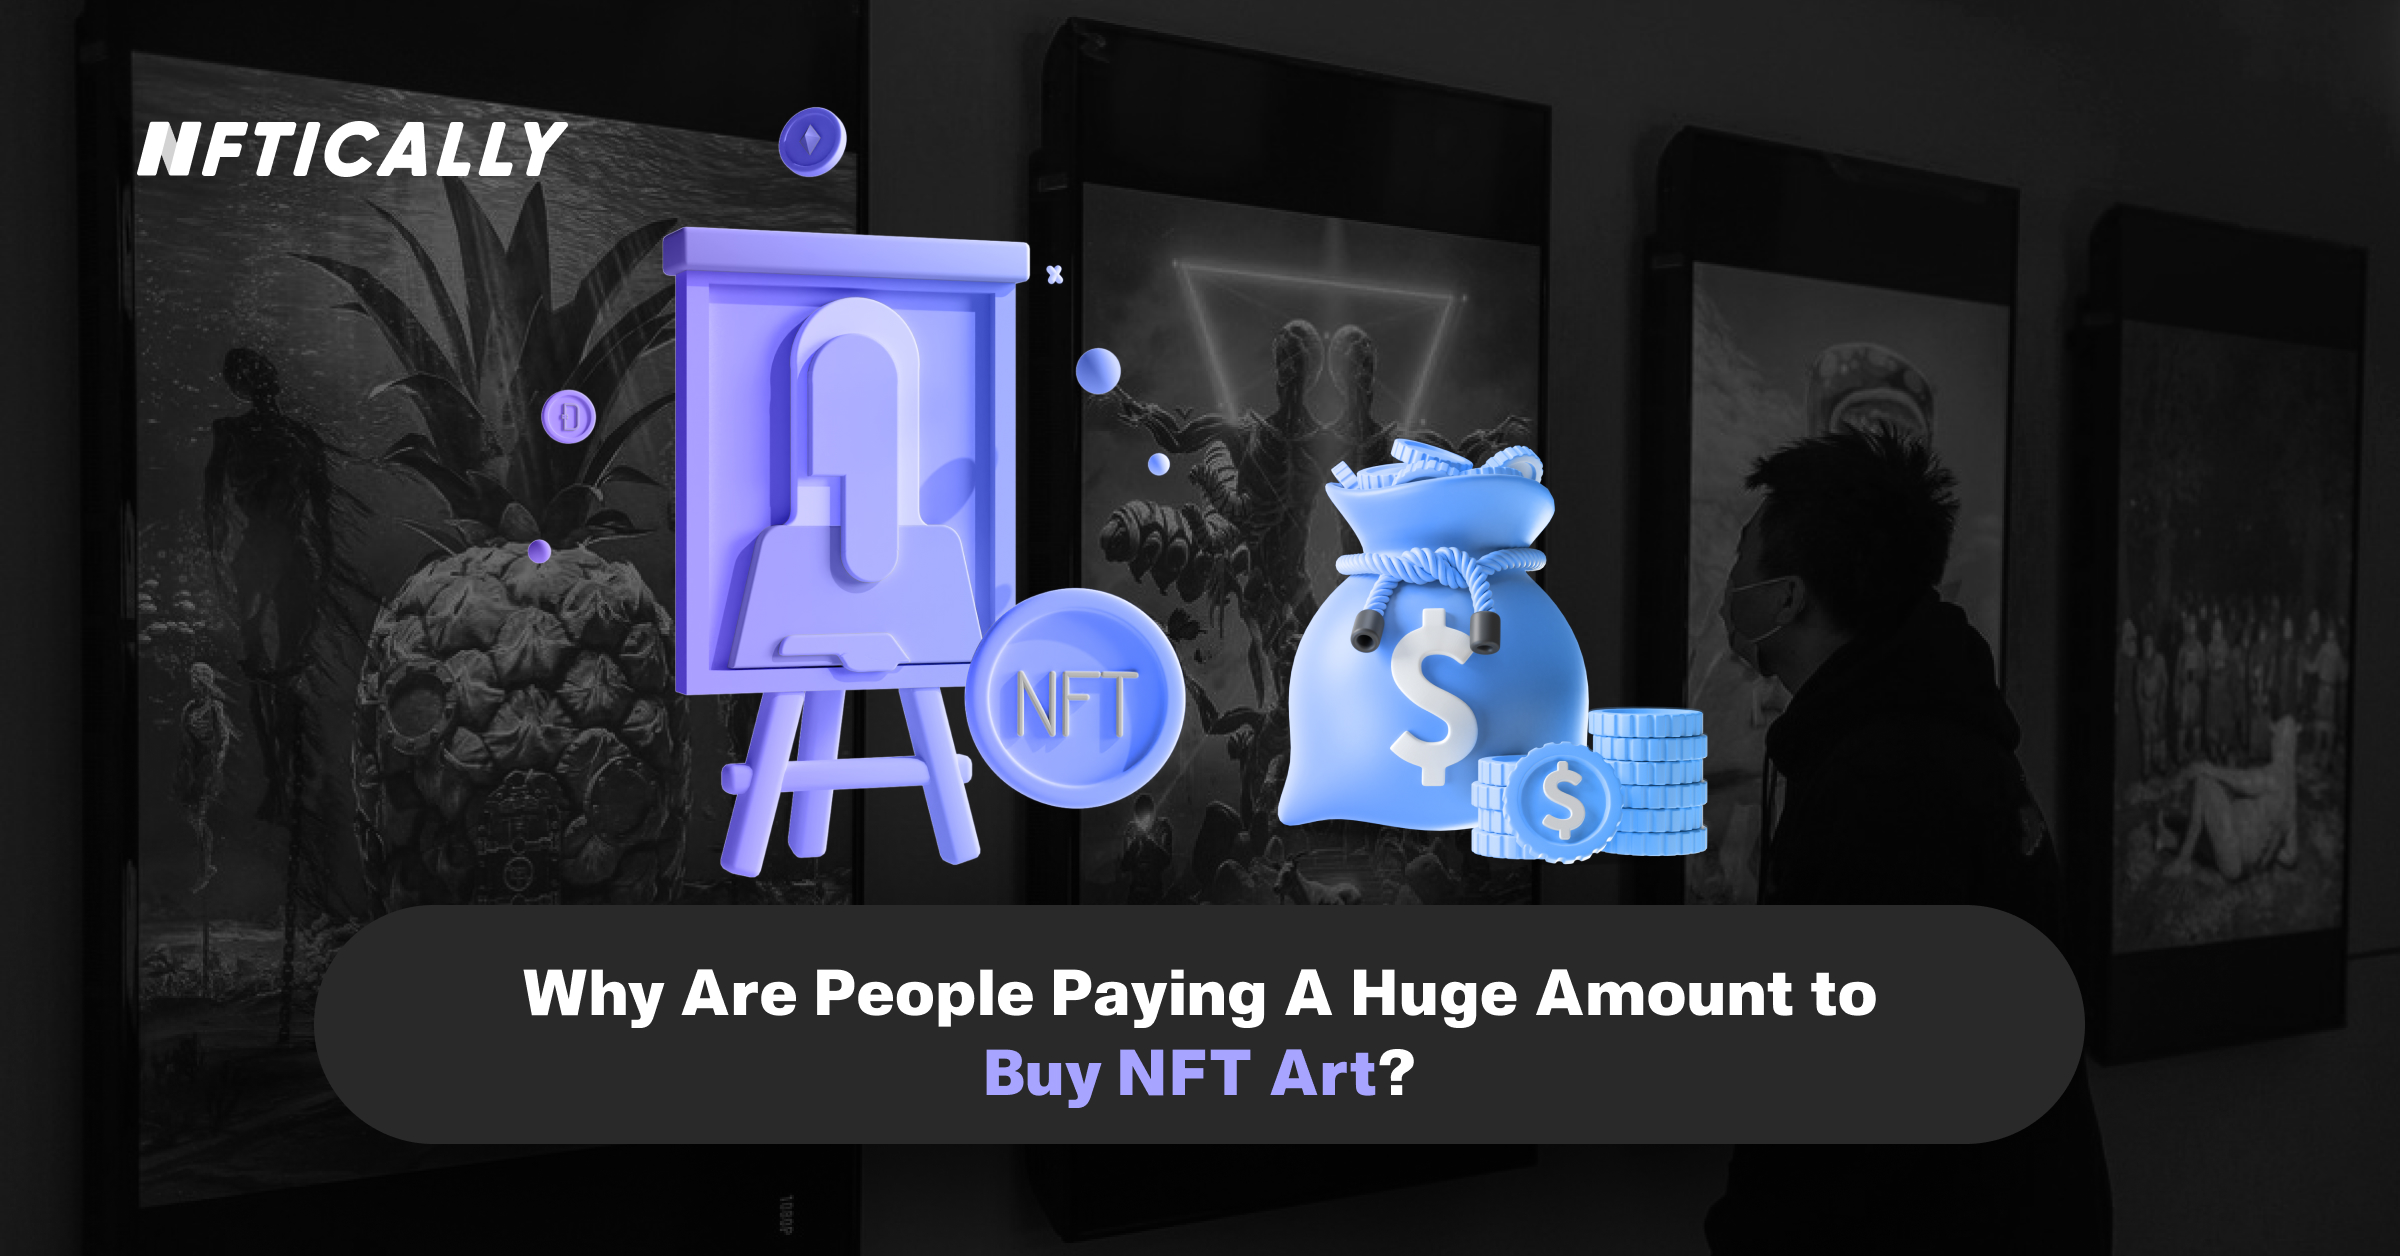 Why Are People Paying a Premium to Buy NFT Art